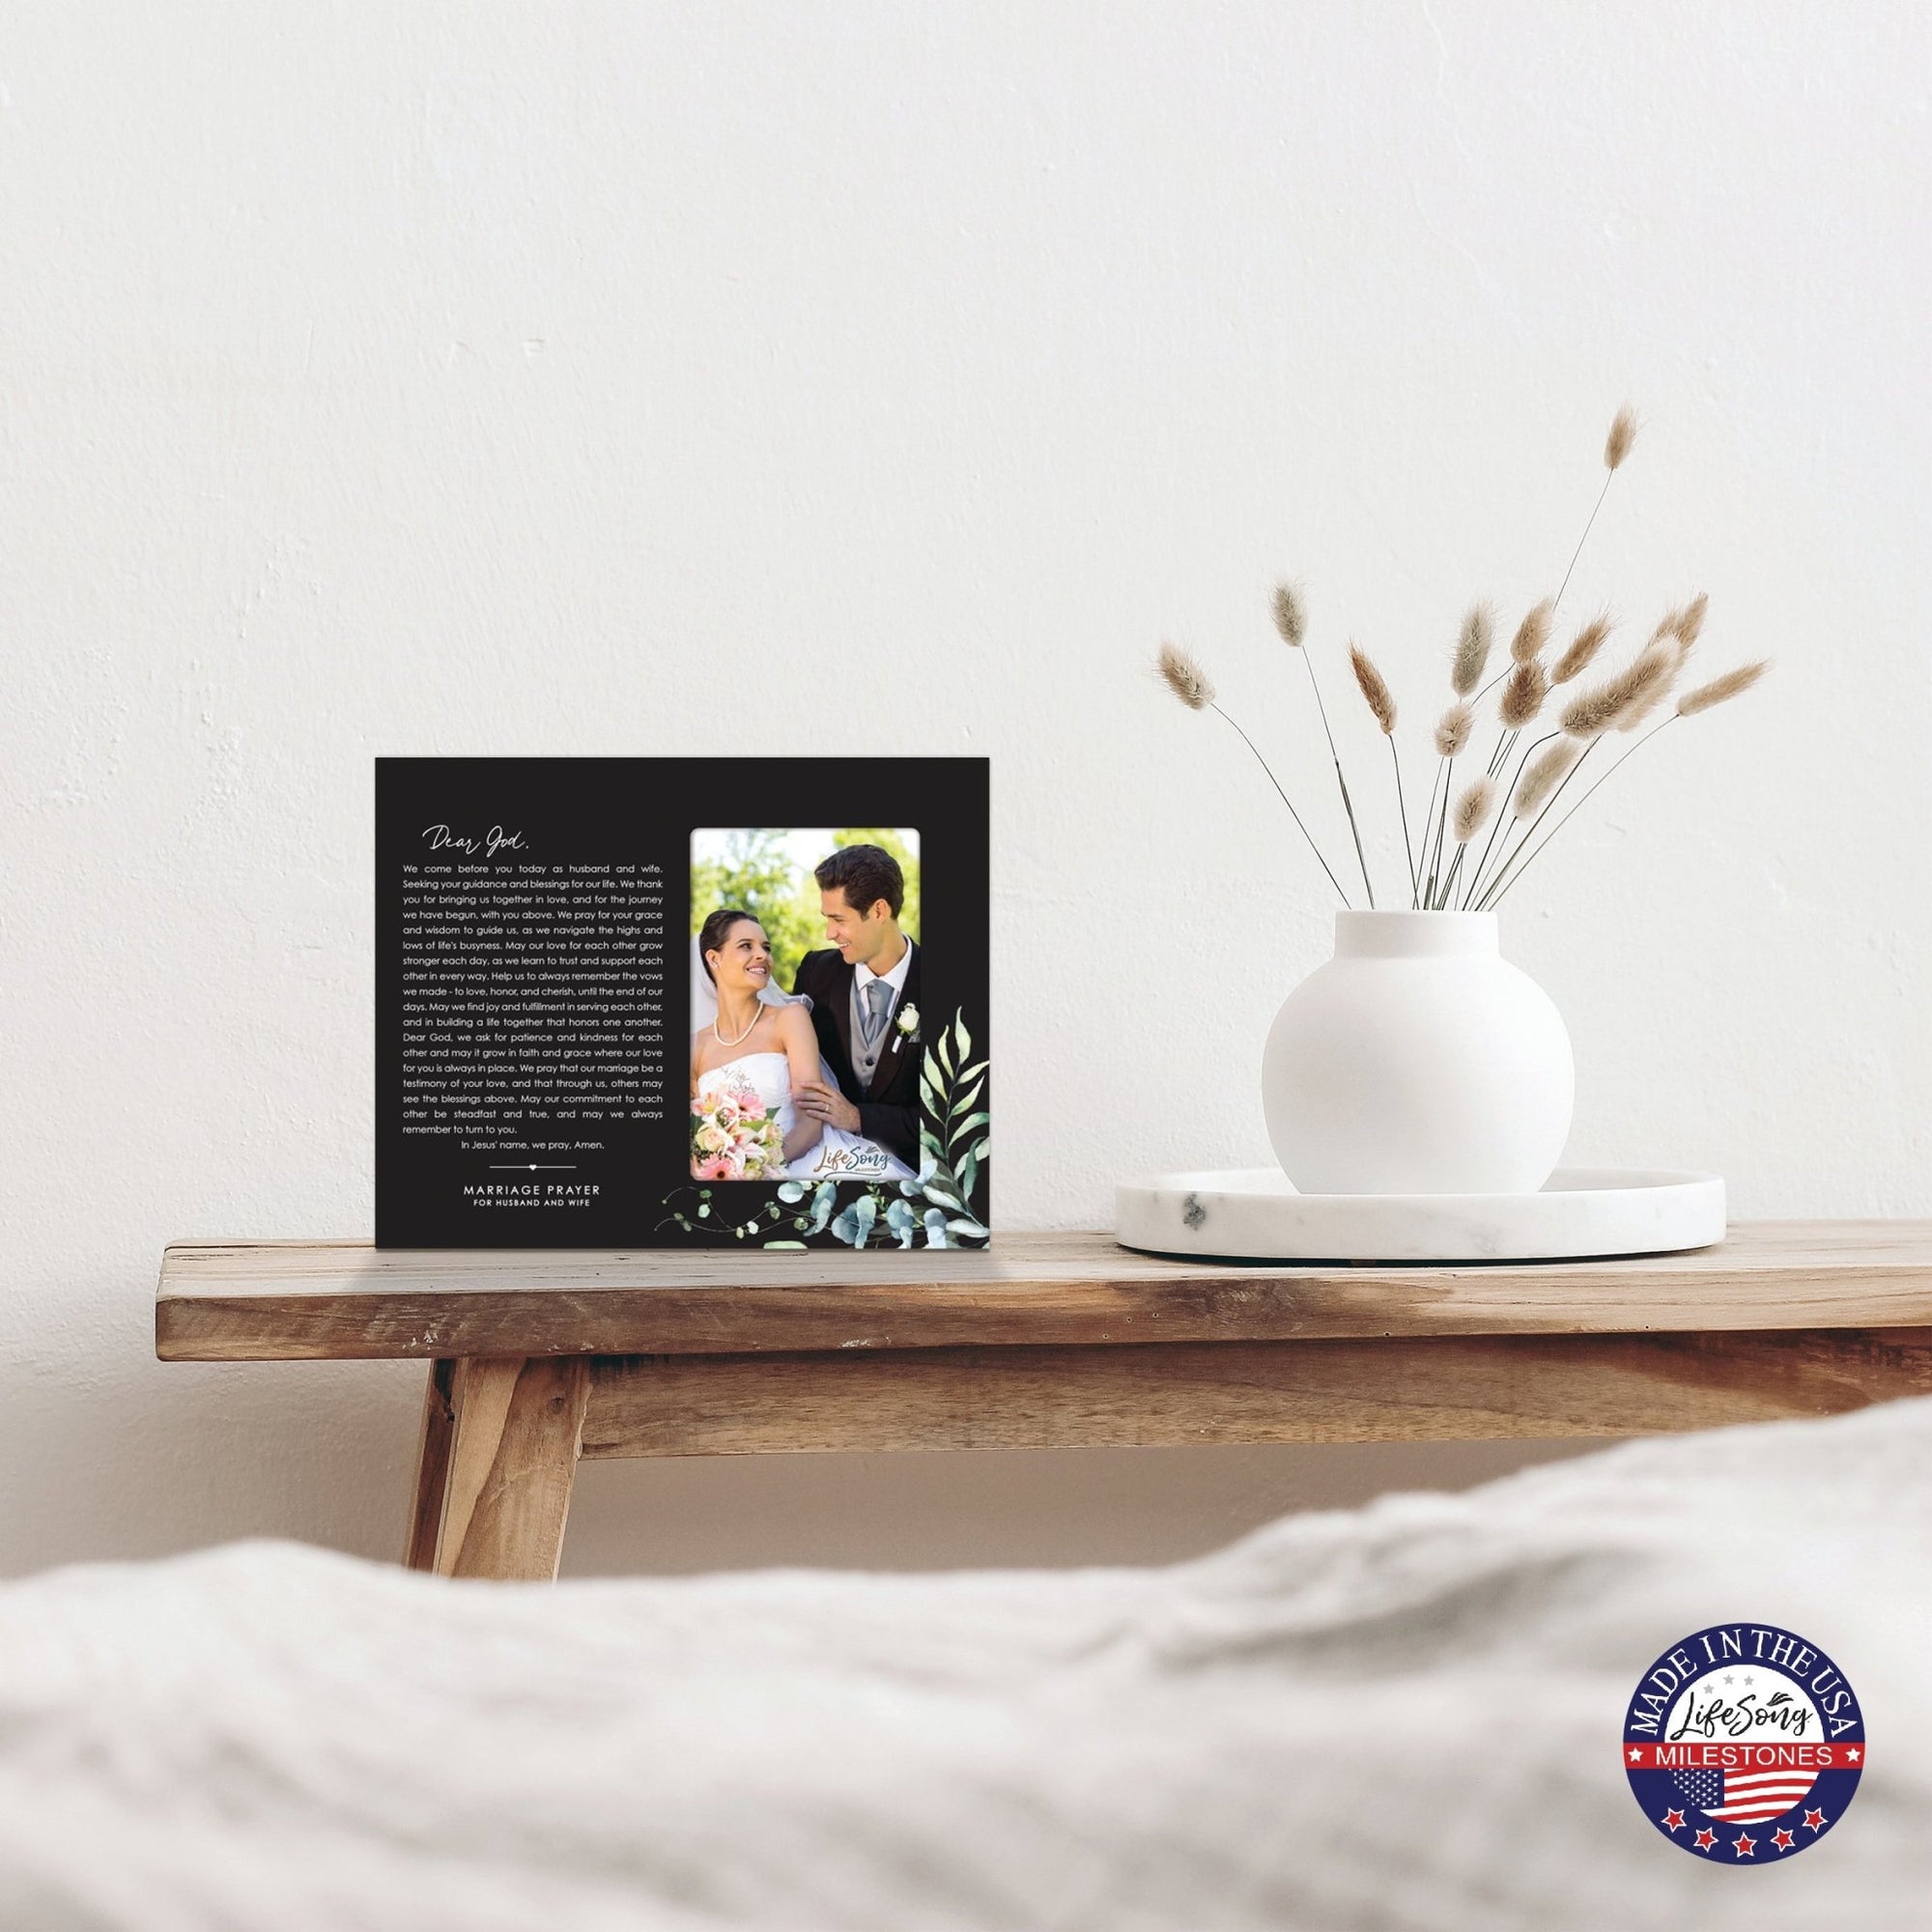 Marriage Prayer Wedding Anniversary Gifts for Couples Wooden Wall And Tabletop Photo Frame - Dear God - LifeSong Milestones